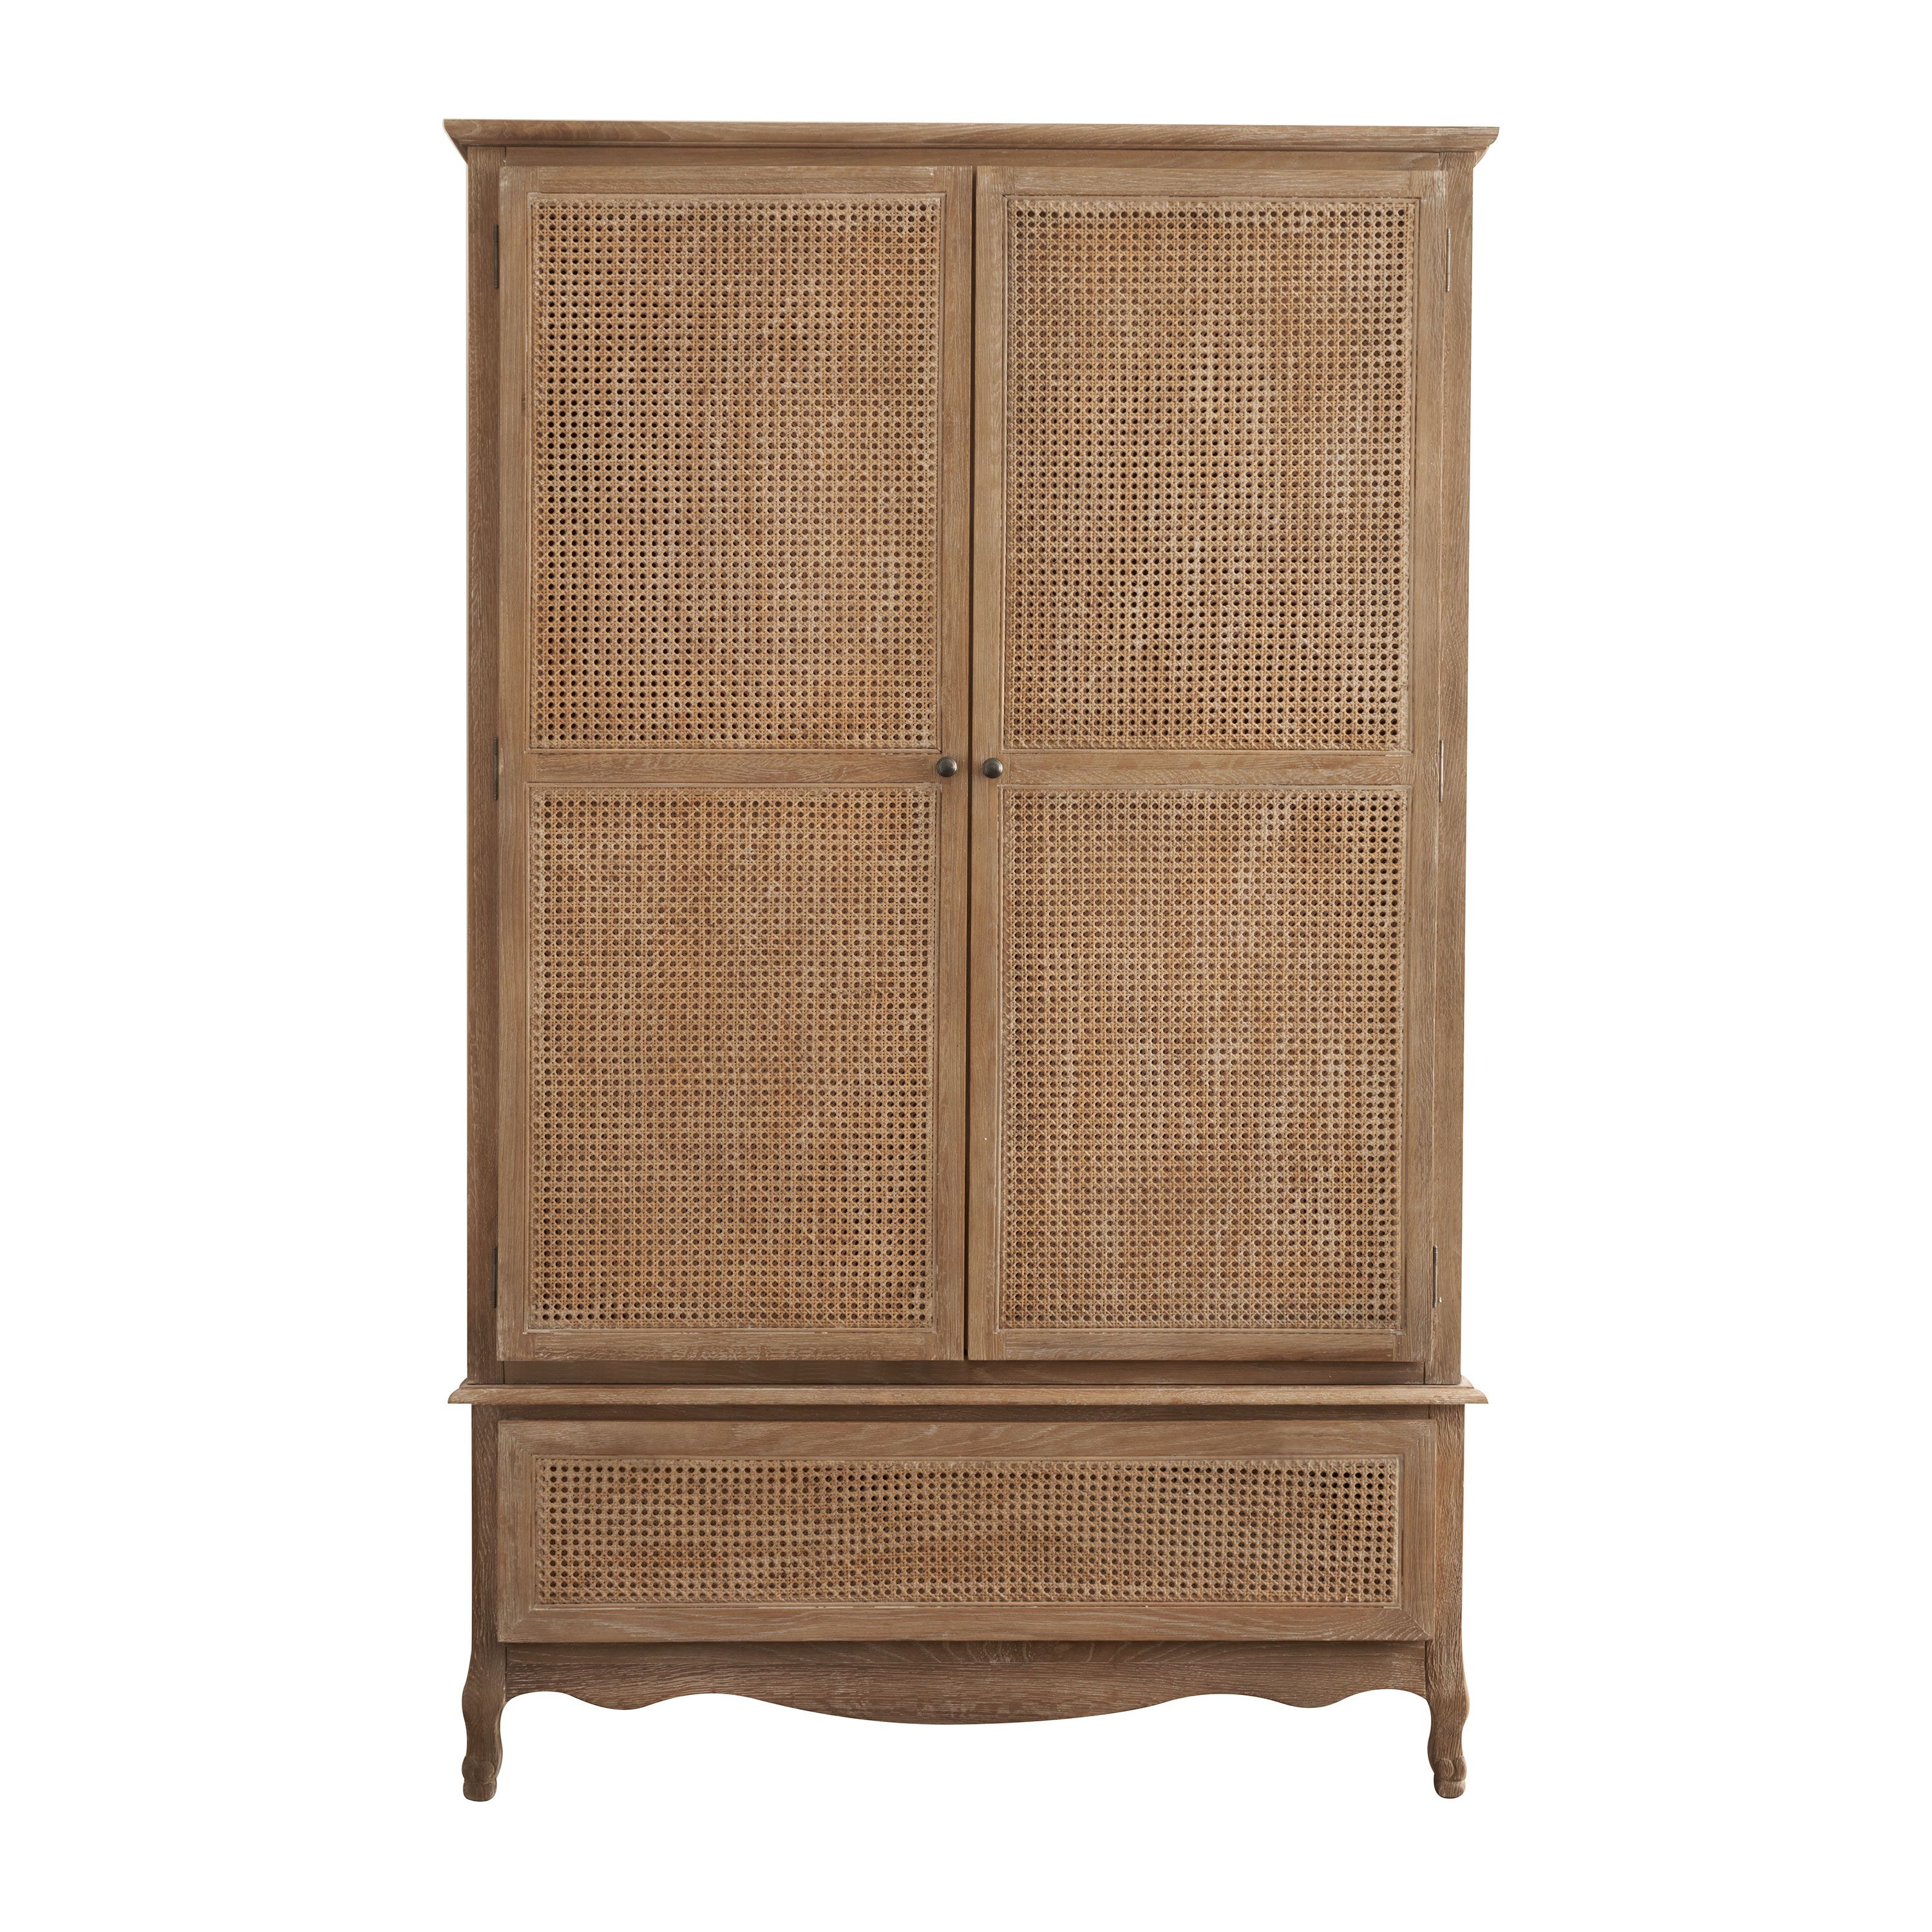 Sienna Rattan Wardrobe | Feather & Black Intended For Wicker Armoire Wardrobes (Gallery 1 of 20)